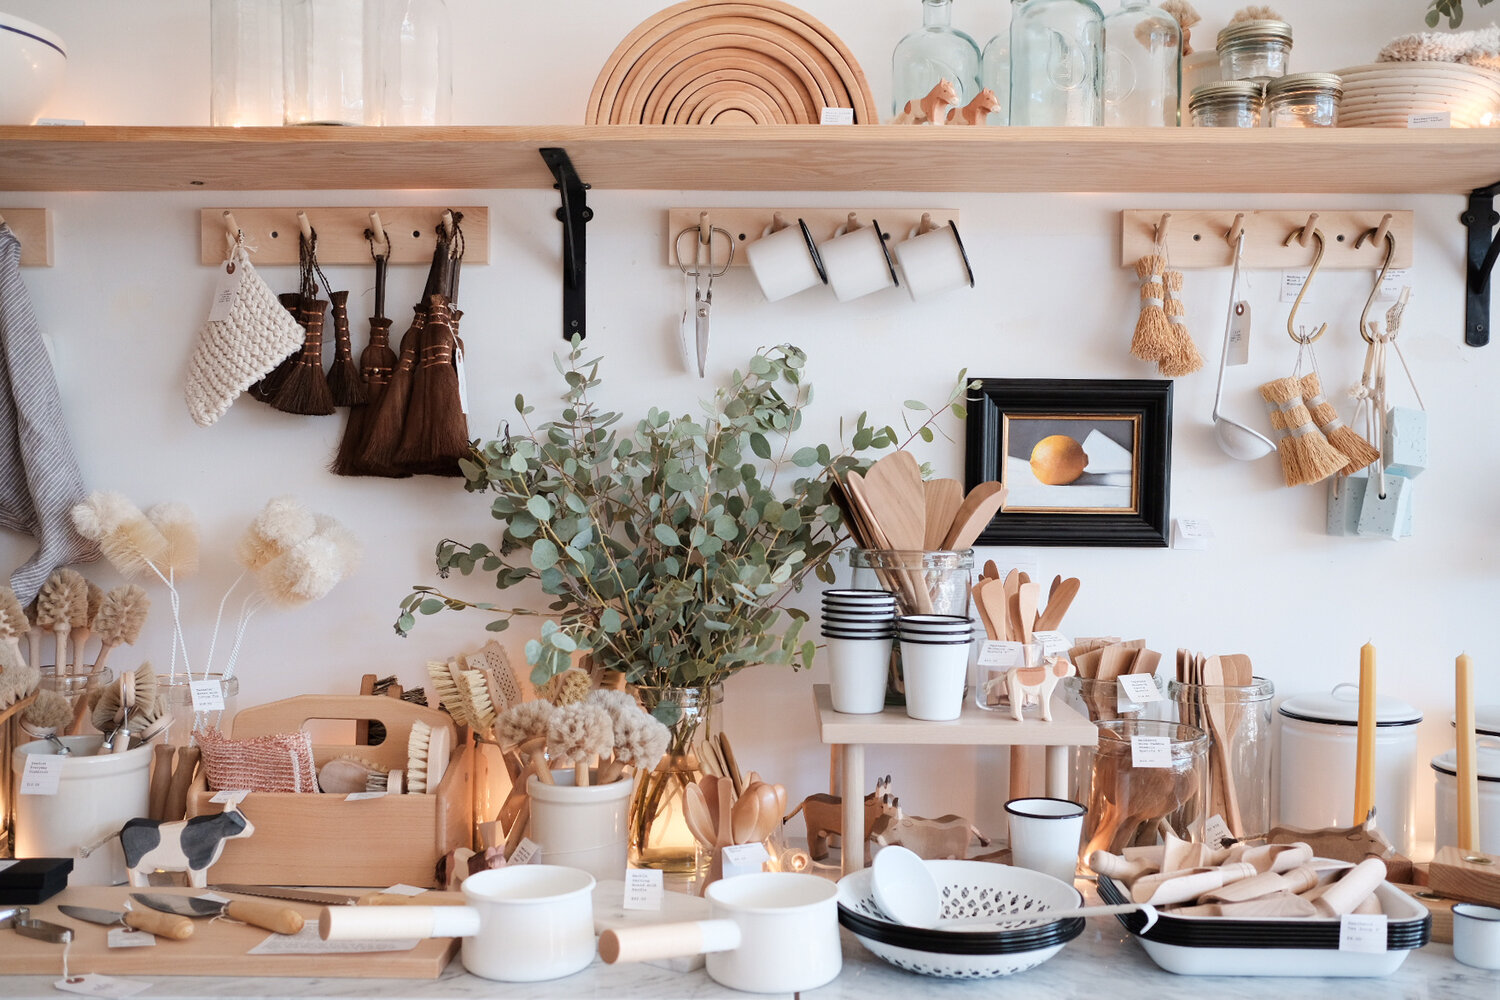 The Foundry with their most amazing of curated home goods…